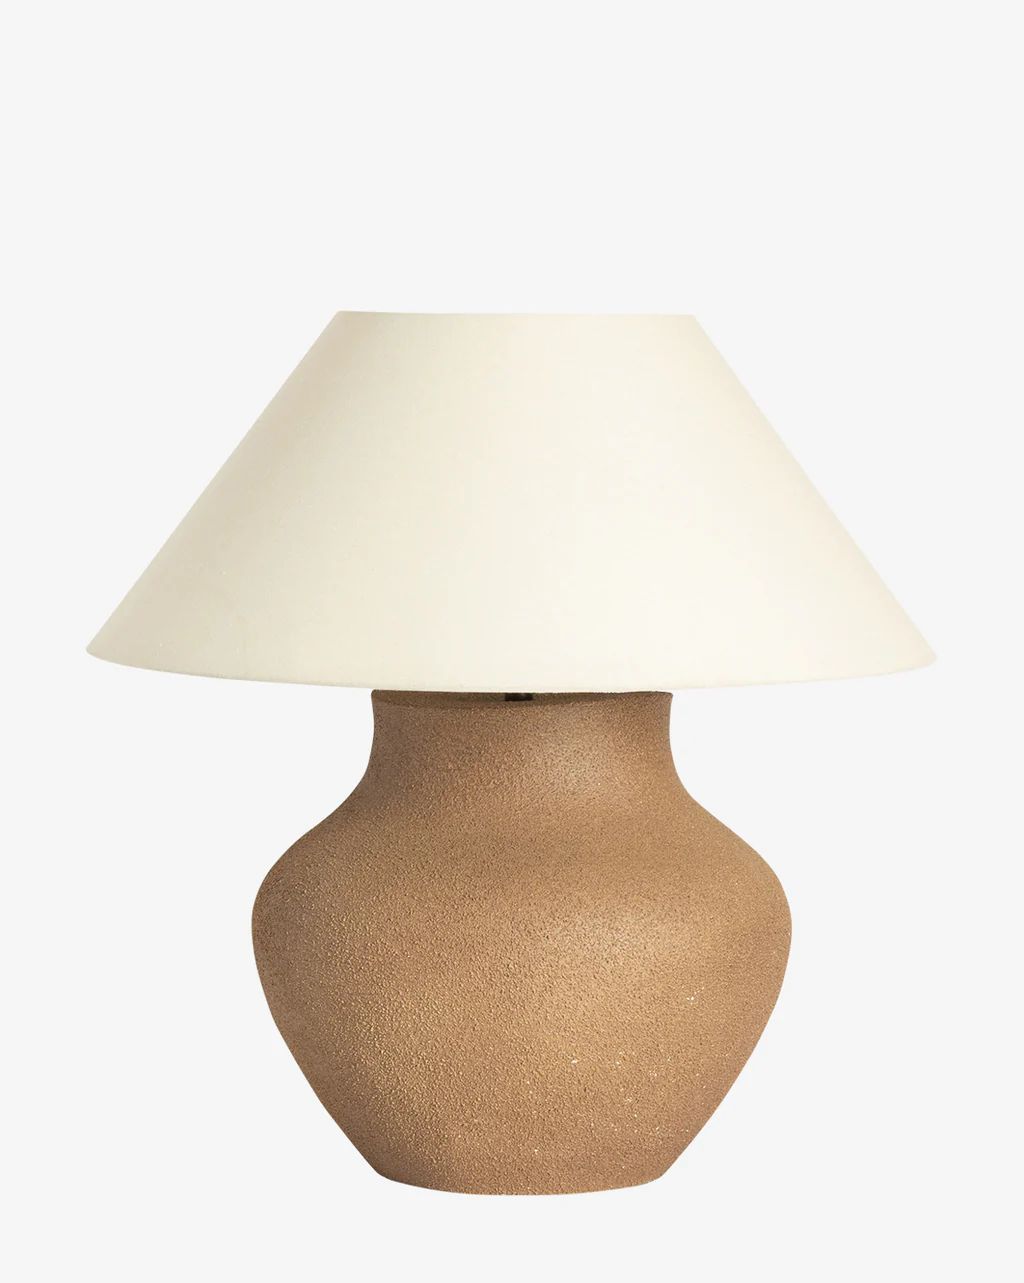 Parma Table Lamp | McGee & Co.